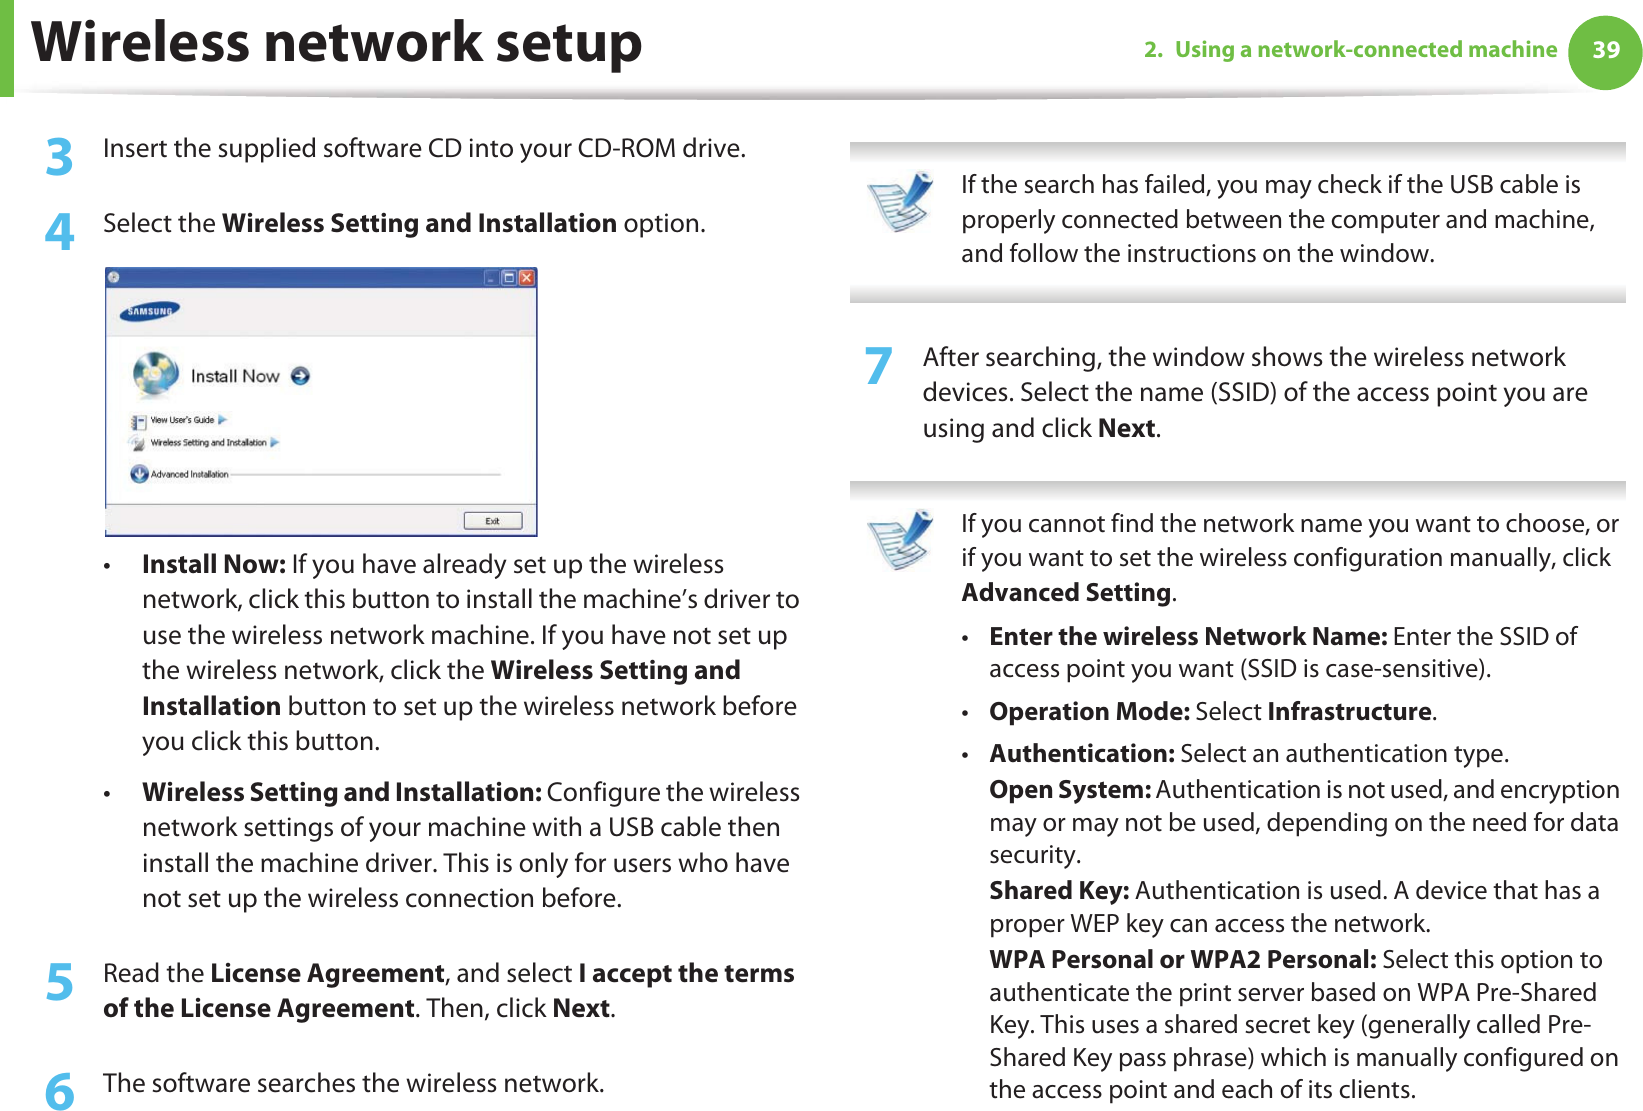 Wireless network setup 392. Using a network-connected machine3  Insert the supplied software CD into your CD-ROM drive.4  Select the Wireless Setting and Installation option.•Install Now: If you have already set up the wireless network, click this button to install the machine’s driver to use the wireless network machine. If you have not set up the wireless network, click the Wireless Setting and Installation button to set up the wireless network before you click this button. •Wireless Setting and Installation: Configure the wireless network settings of your machine with a USB cable then install the machine driver. This is only for users who have not set up the wireless connection before.5  Read the License Agreement, and select I accept the terms of the License Agreement. Then, click Next.6  The software searches the wireless network. If the search has failed, you may check if the USB cable is properly connected between the computer and machine, and follow the instructions on the window. 7  After searching, the window shows the wireless network devices. Select the name (SSID) of the access point you are using and click Next. If you cannot find the network name you want to choose, or if you want to set the wireless configuration manually, click Advanced Setting.•Enter the wireless Network Name: Enter the SSID of access point you want (SSID is case-sensitive).•Operation Mode: Select Infrastructure.•Authentication: Select an authentication type.Open System: Authentication is not used, and encryption may or may not be used, depending on the need for data security.Shared Key: Authentication is used. A device that has a proper WEP key can access the network.WPA Personal or WPA2 Personal: Select this option to authenticate the print server based on WPA Pre-Shared Key. This uses a shared secret key (generally called Pre- Shared Key pass phrase) which is manually configured on the access point and each of its clients.